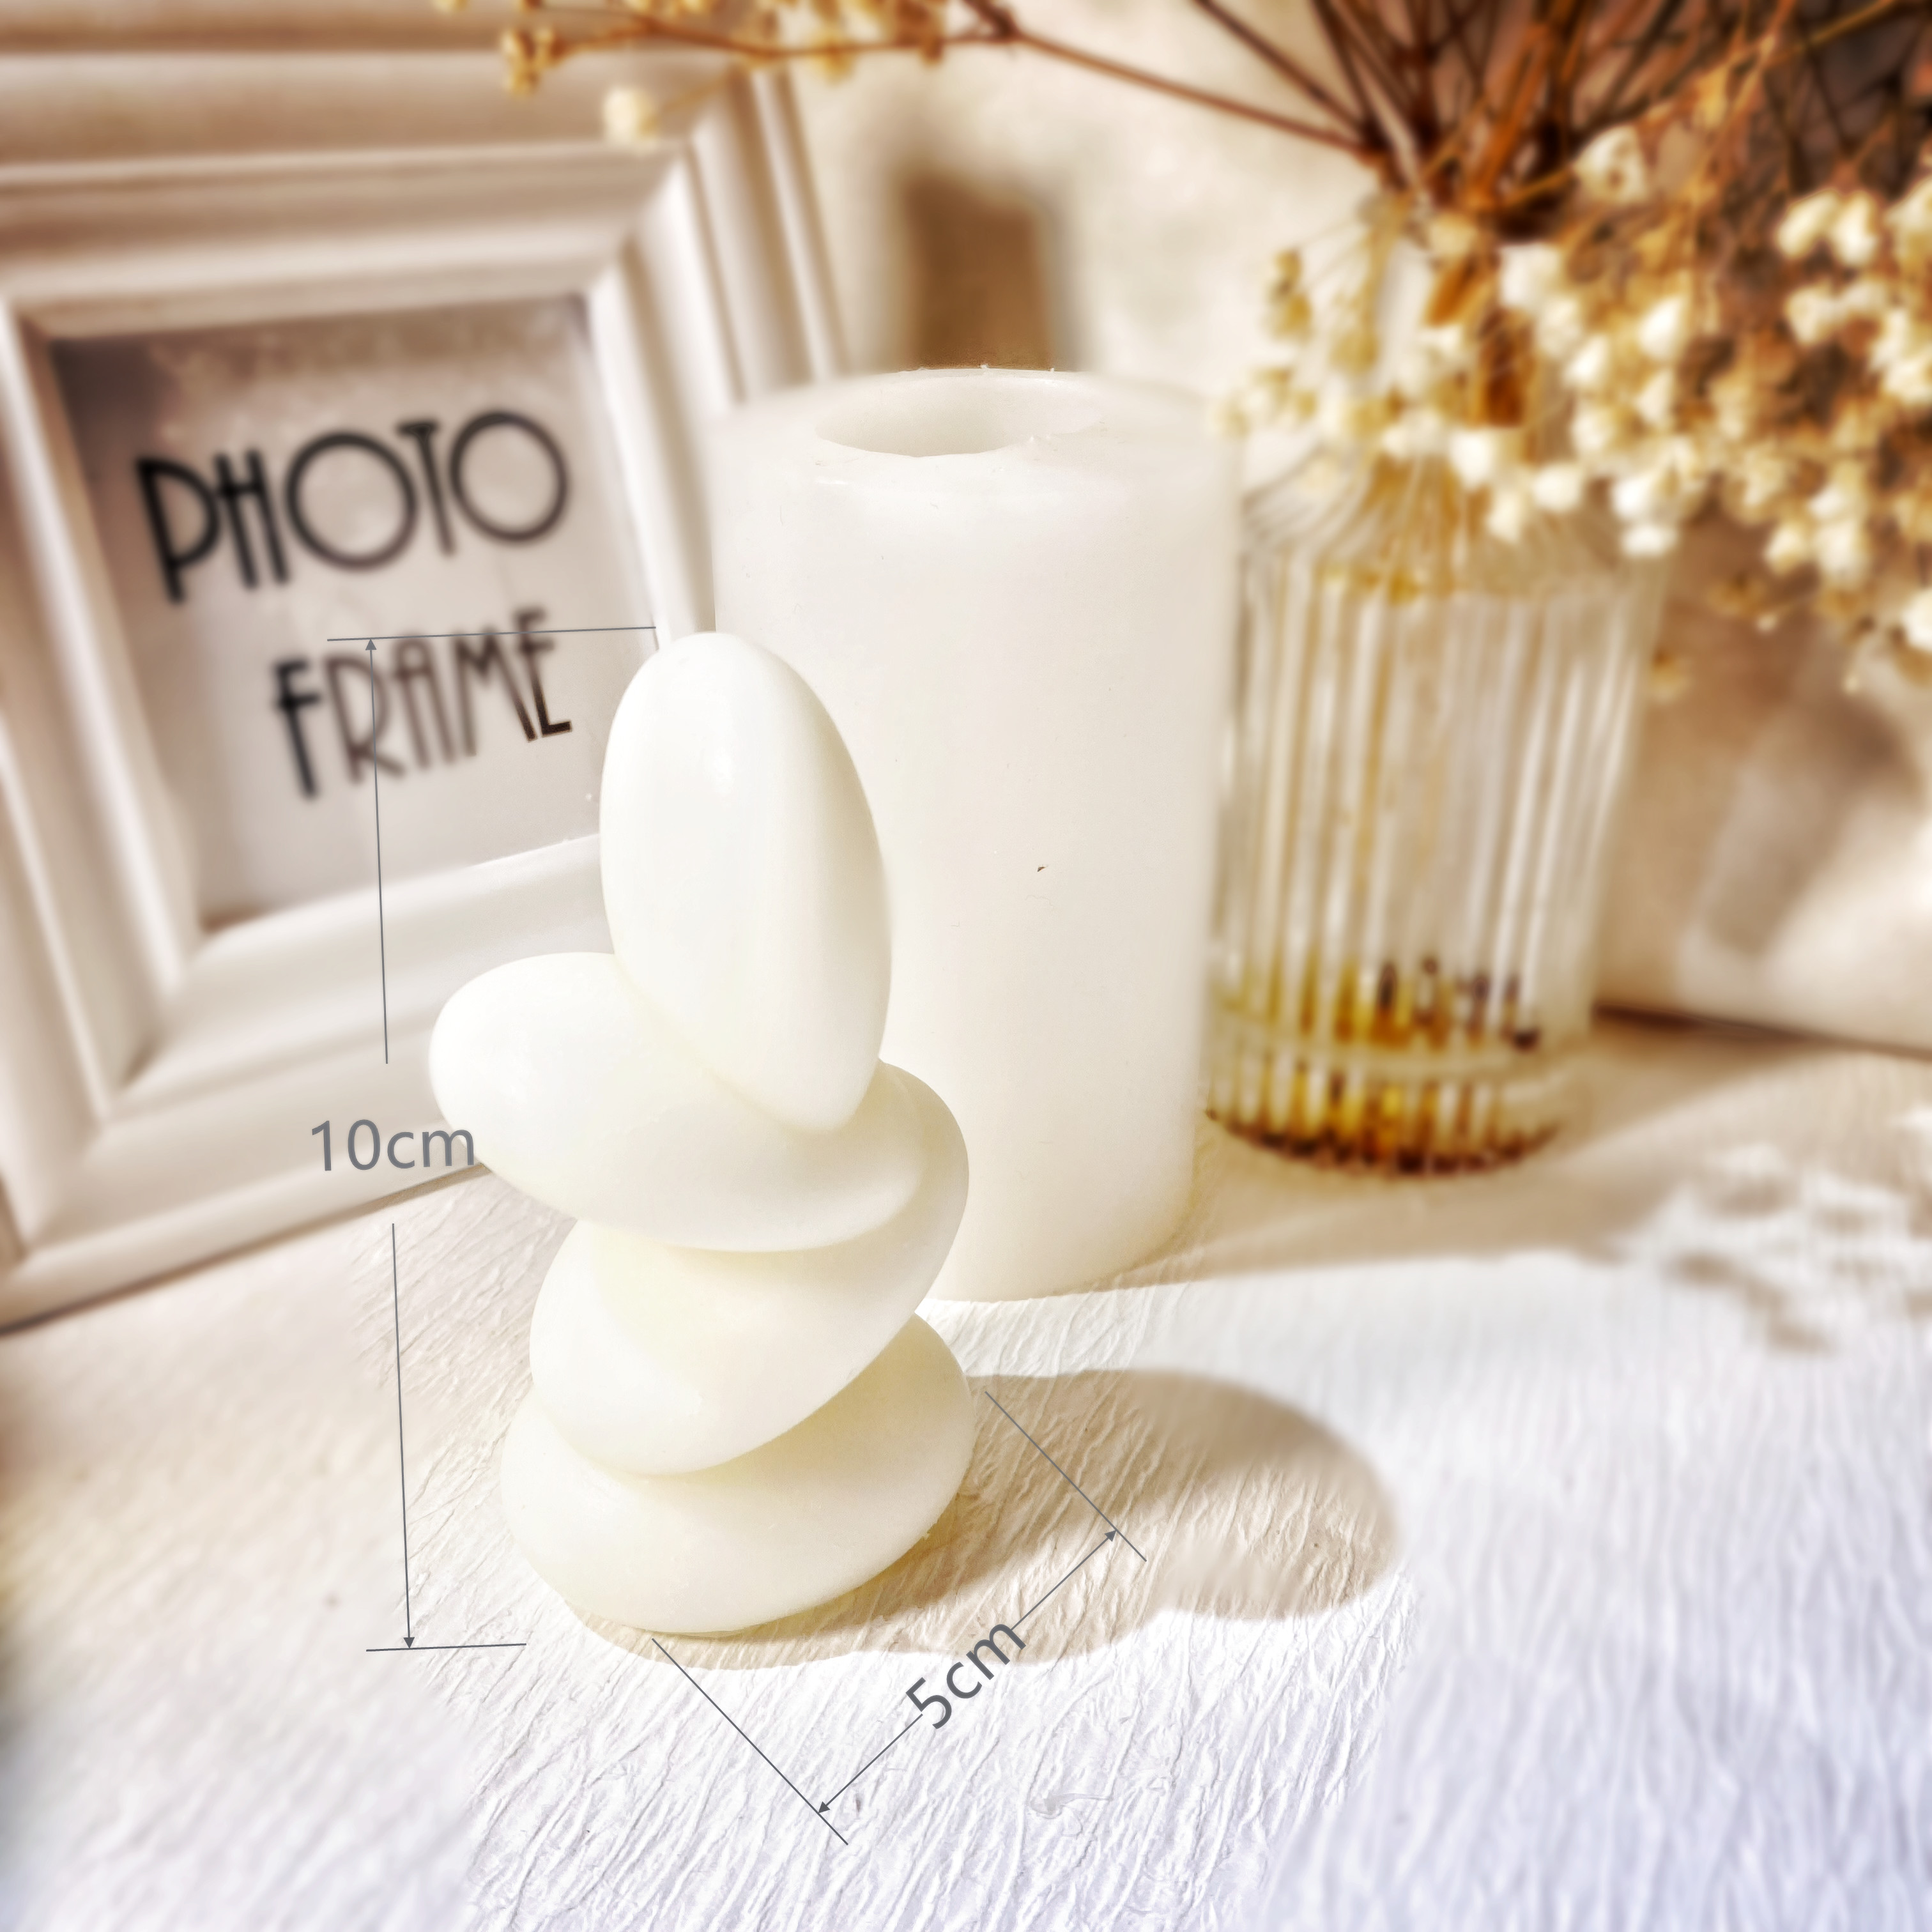 US$ 9.90 - New mold Various styles Heart shape Bubble Cube Diamond angle  silicone candle mold For Making handmade Gypsum Home Decor Aromatherapy wax  